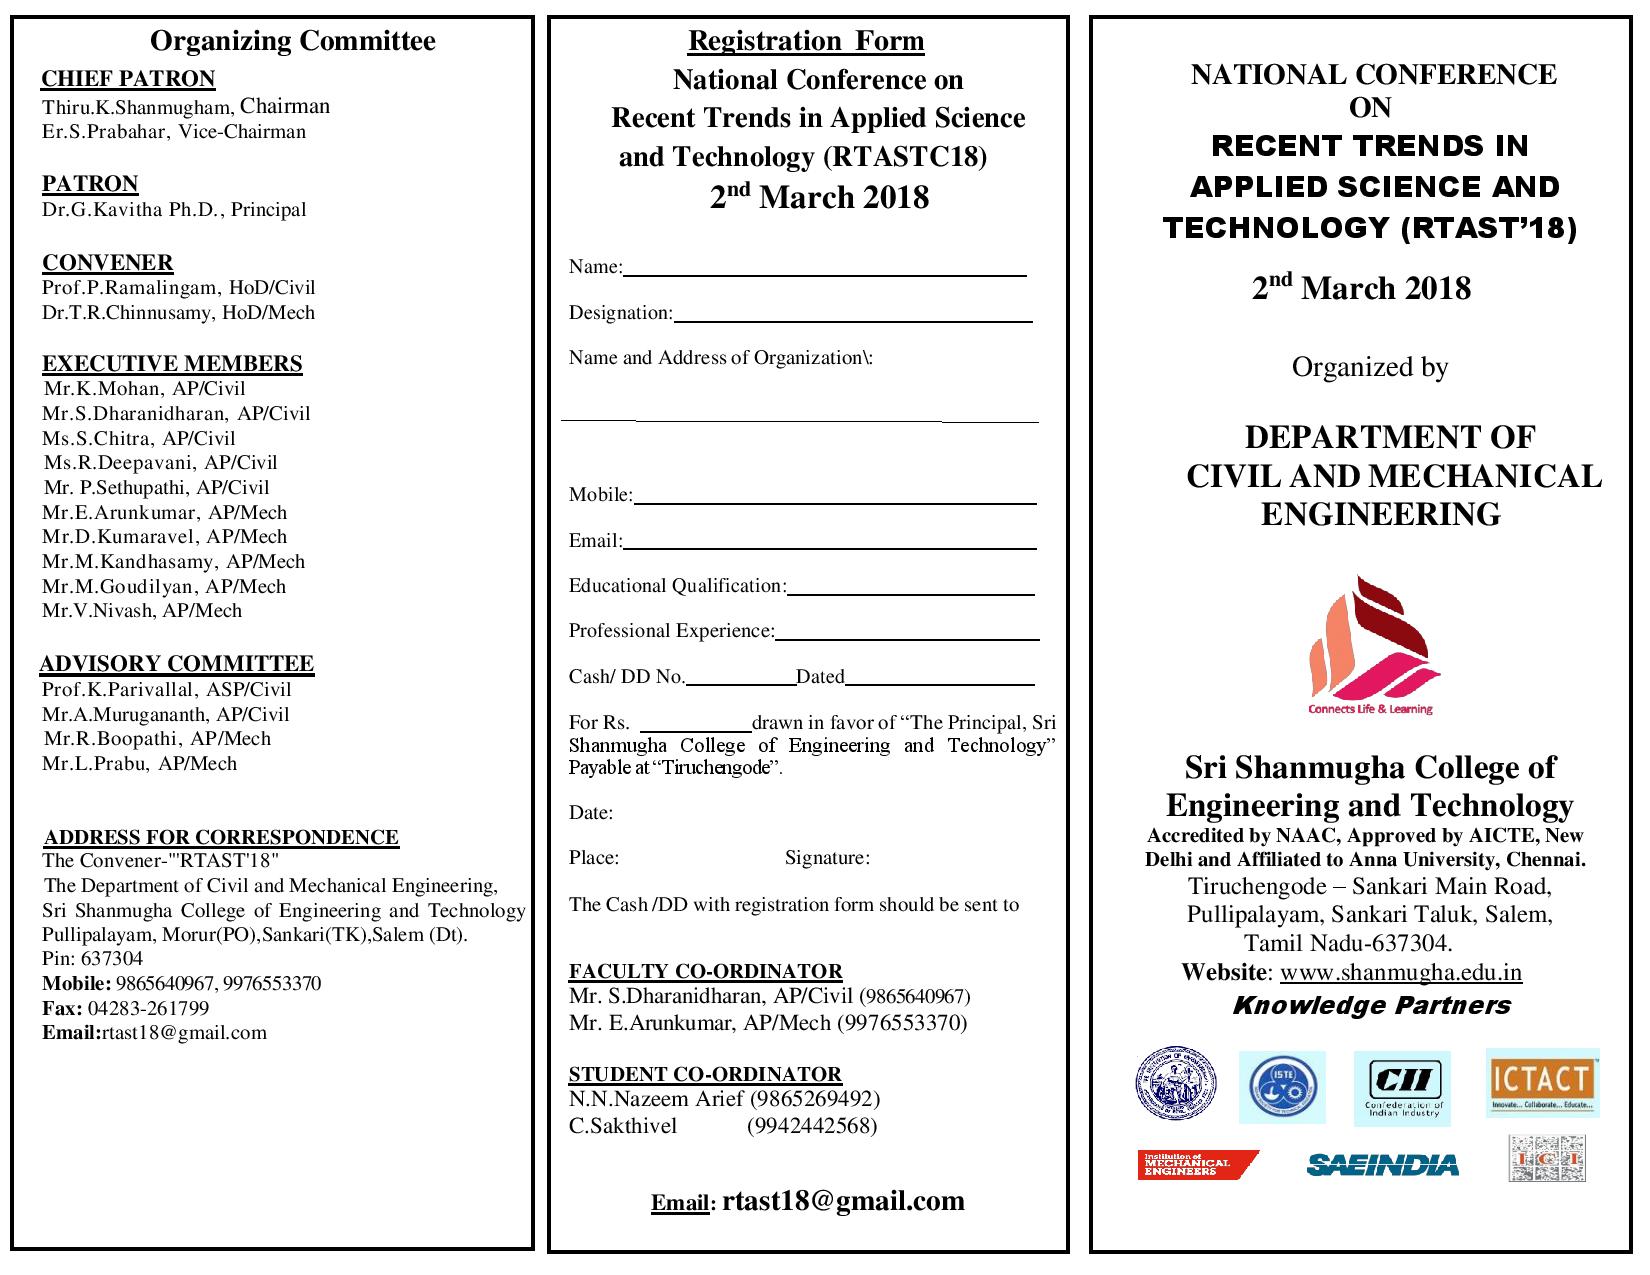 National Conference on Recent Trends in Applied Science and Technology RTAST 18